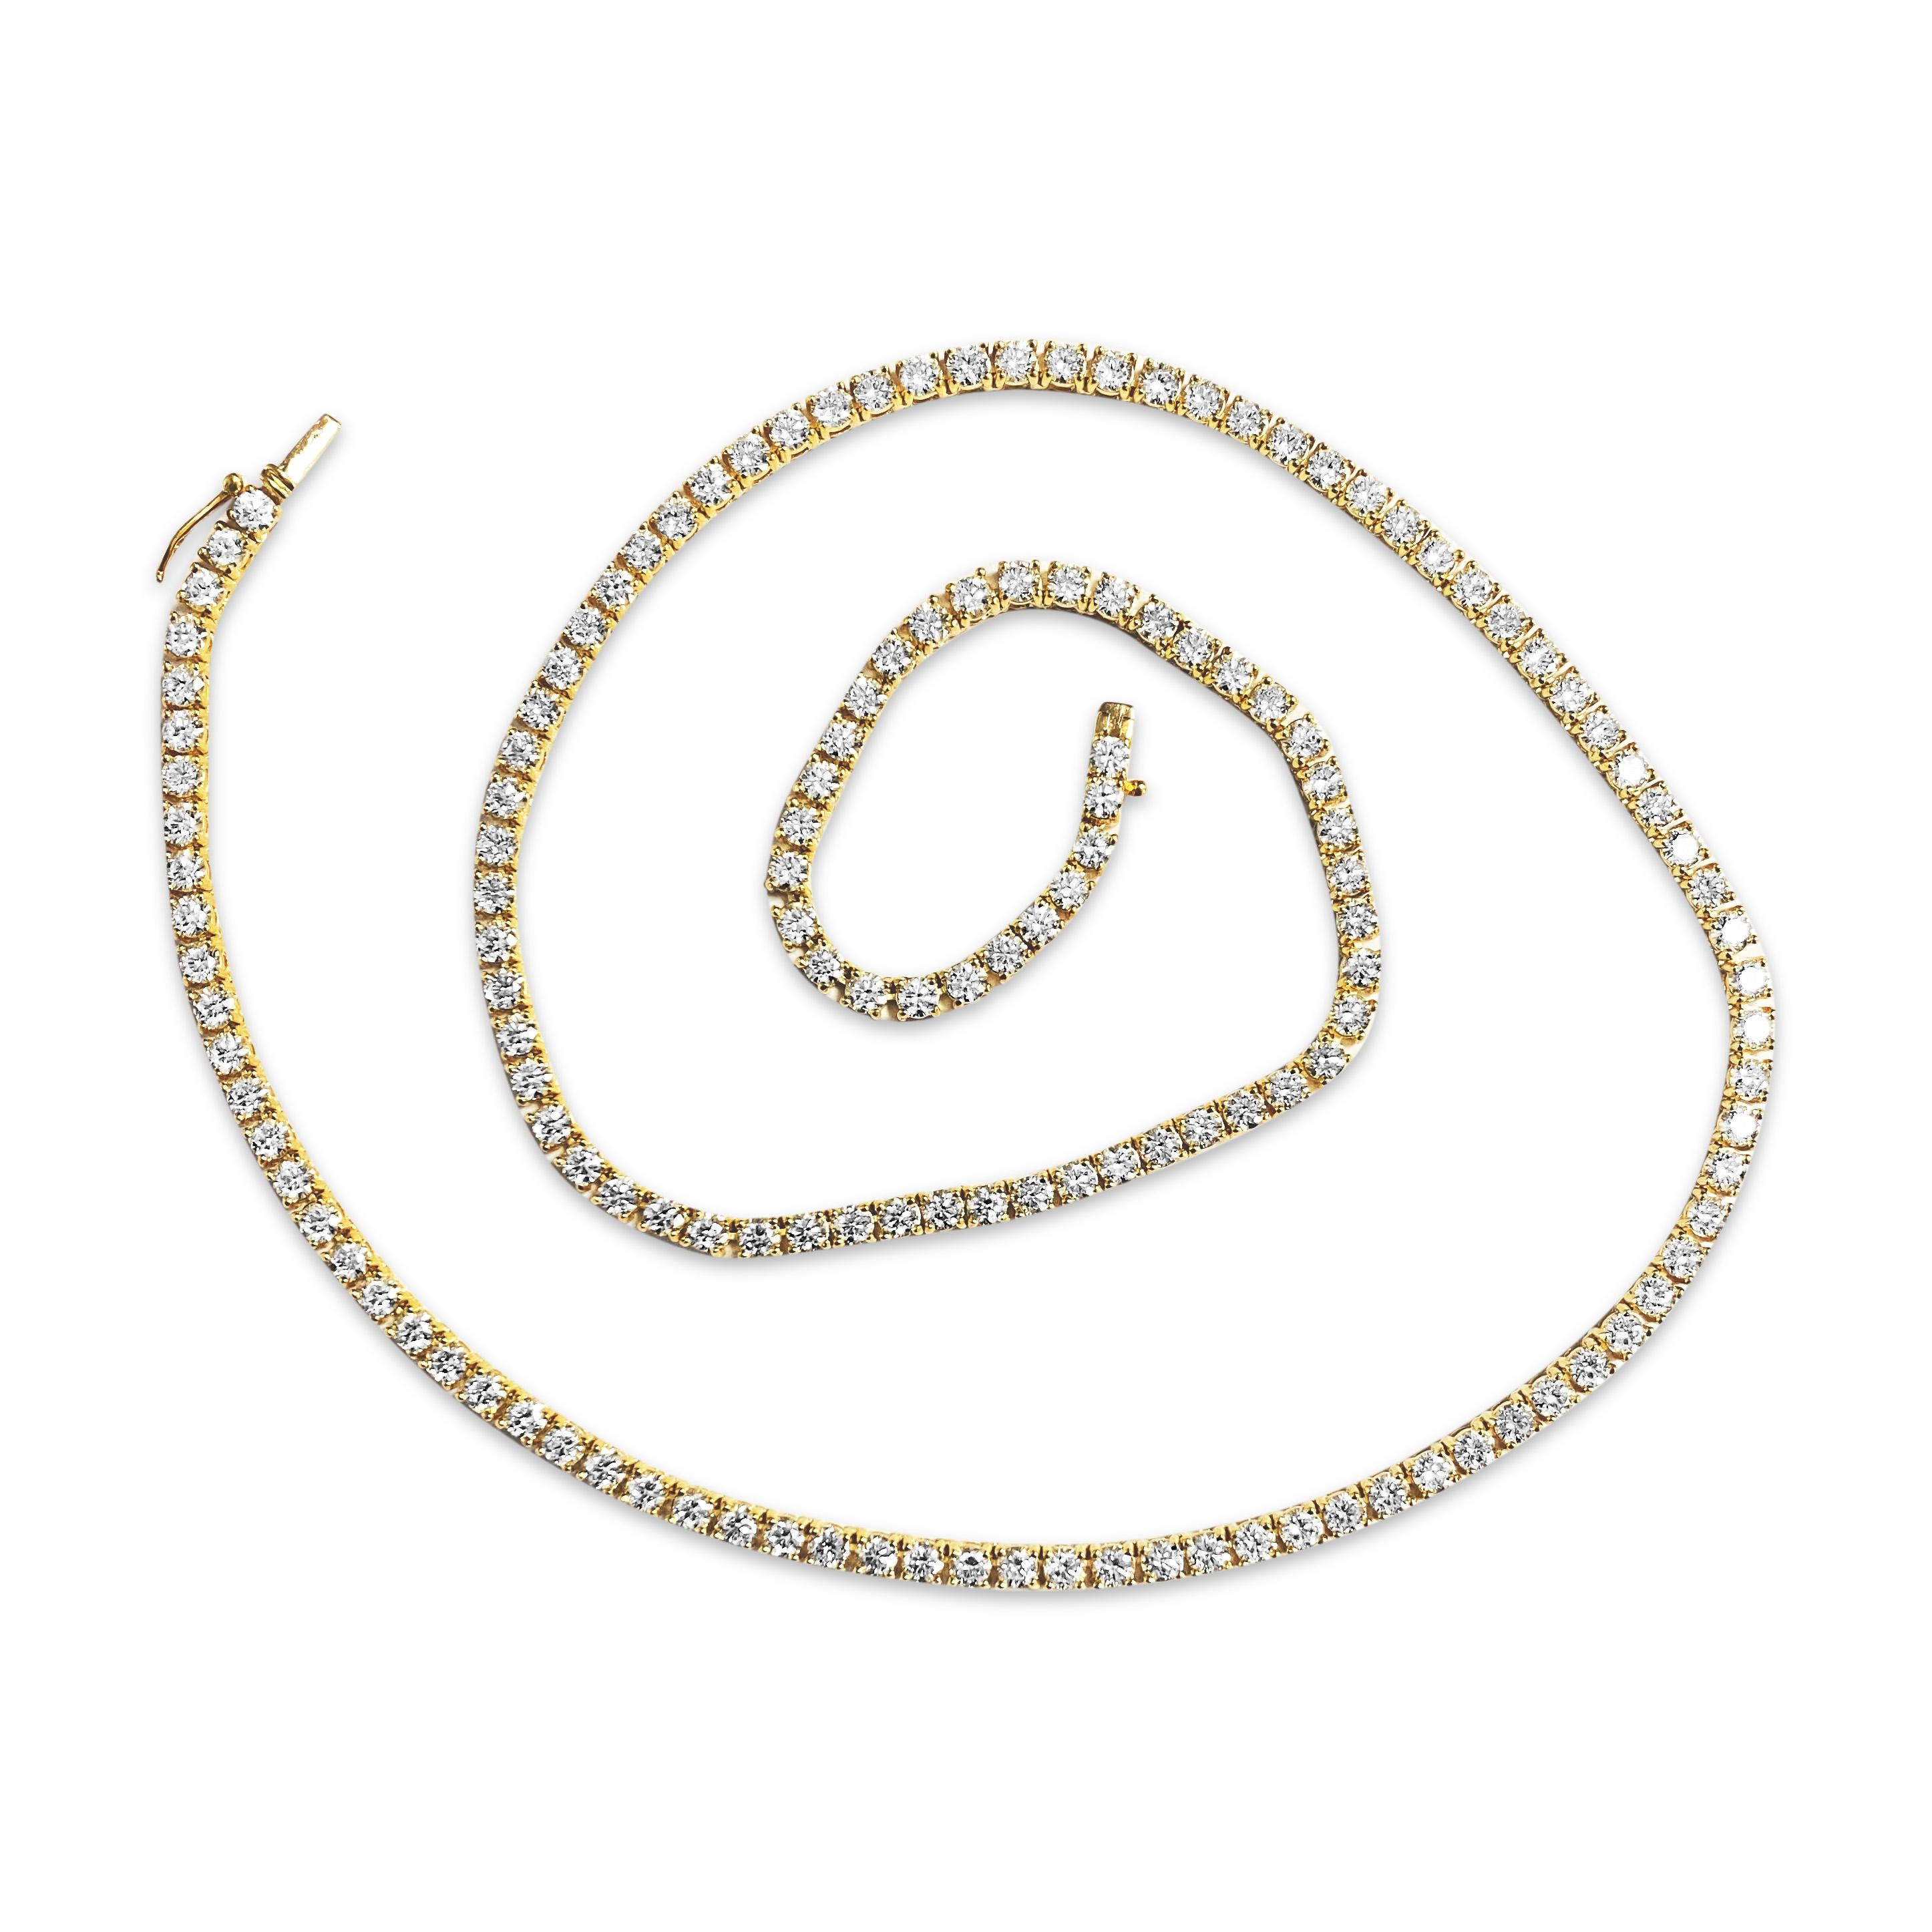 Crafted from luxurious 14k yellow gold, this stunning necklace features an impressive 15.00 carats of round brilliant cut diamonds, boasting VVS clarity and H color. Each diamond is meticulously set in secure prongs, creating a dazzling display of